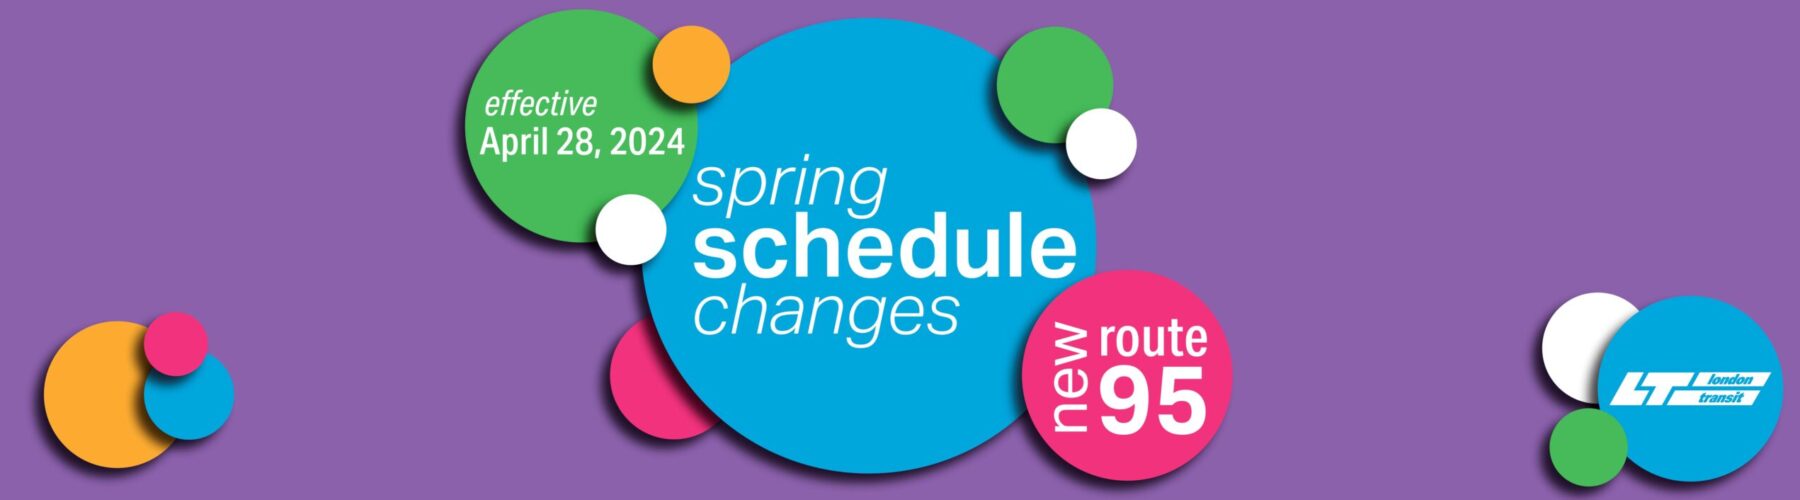 Click here to go to the web post regarding new Route 95 and Spring Schedule Changes taking effect April 28, 2024.